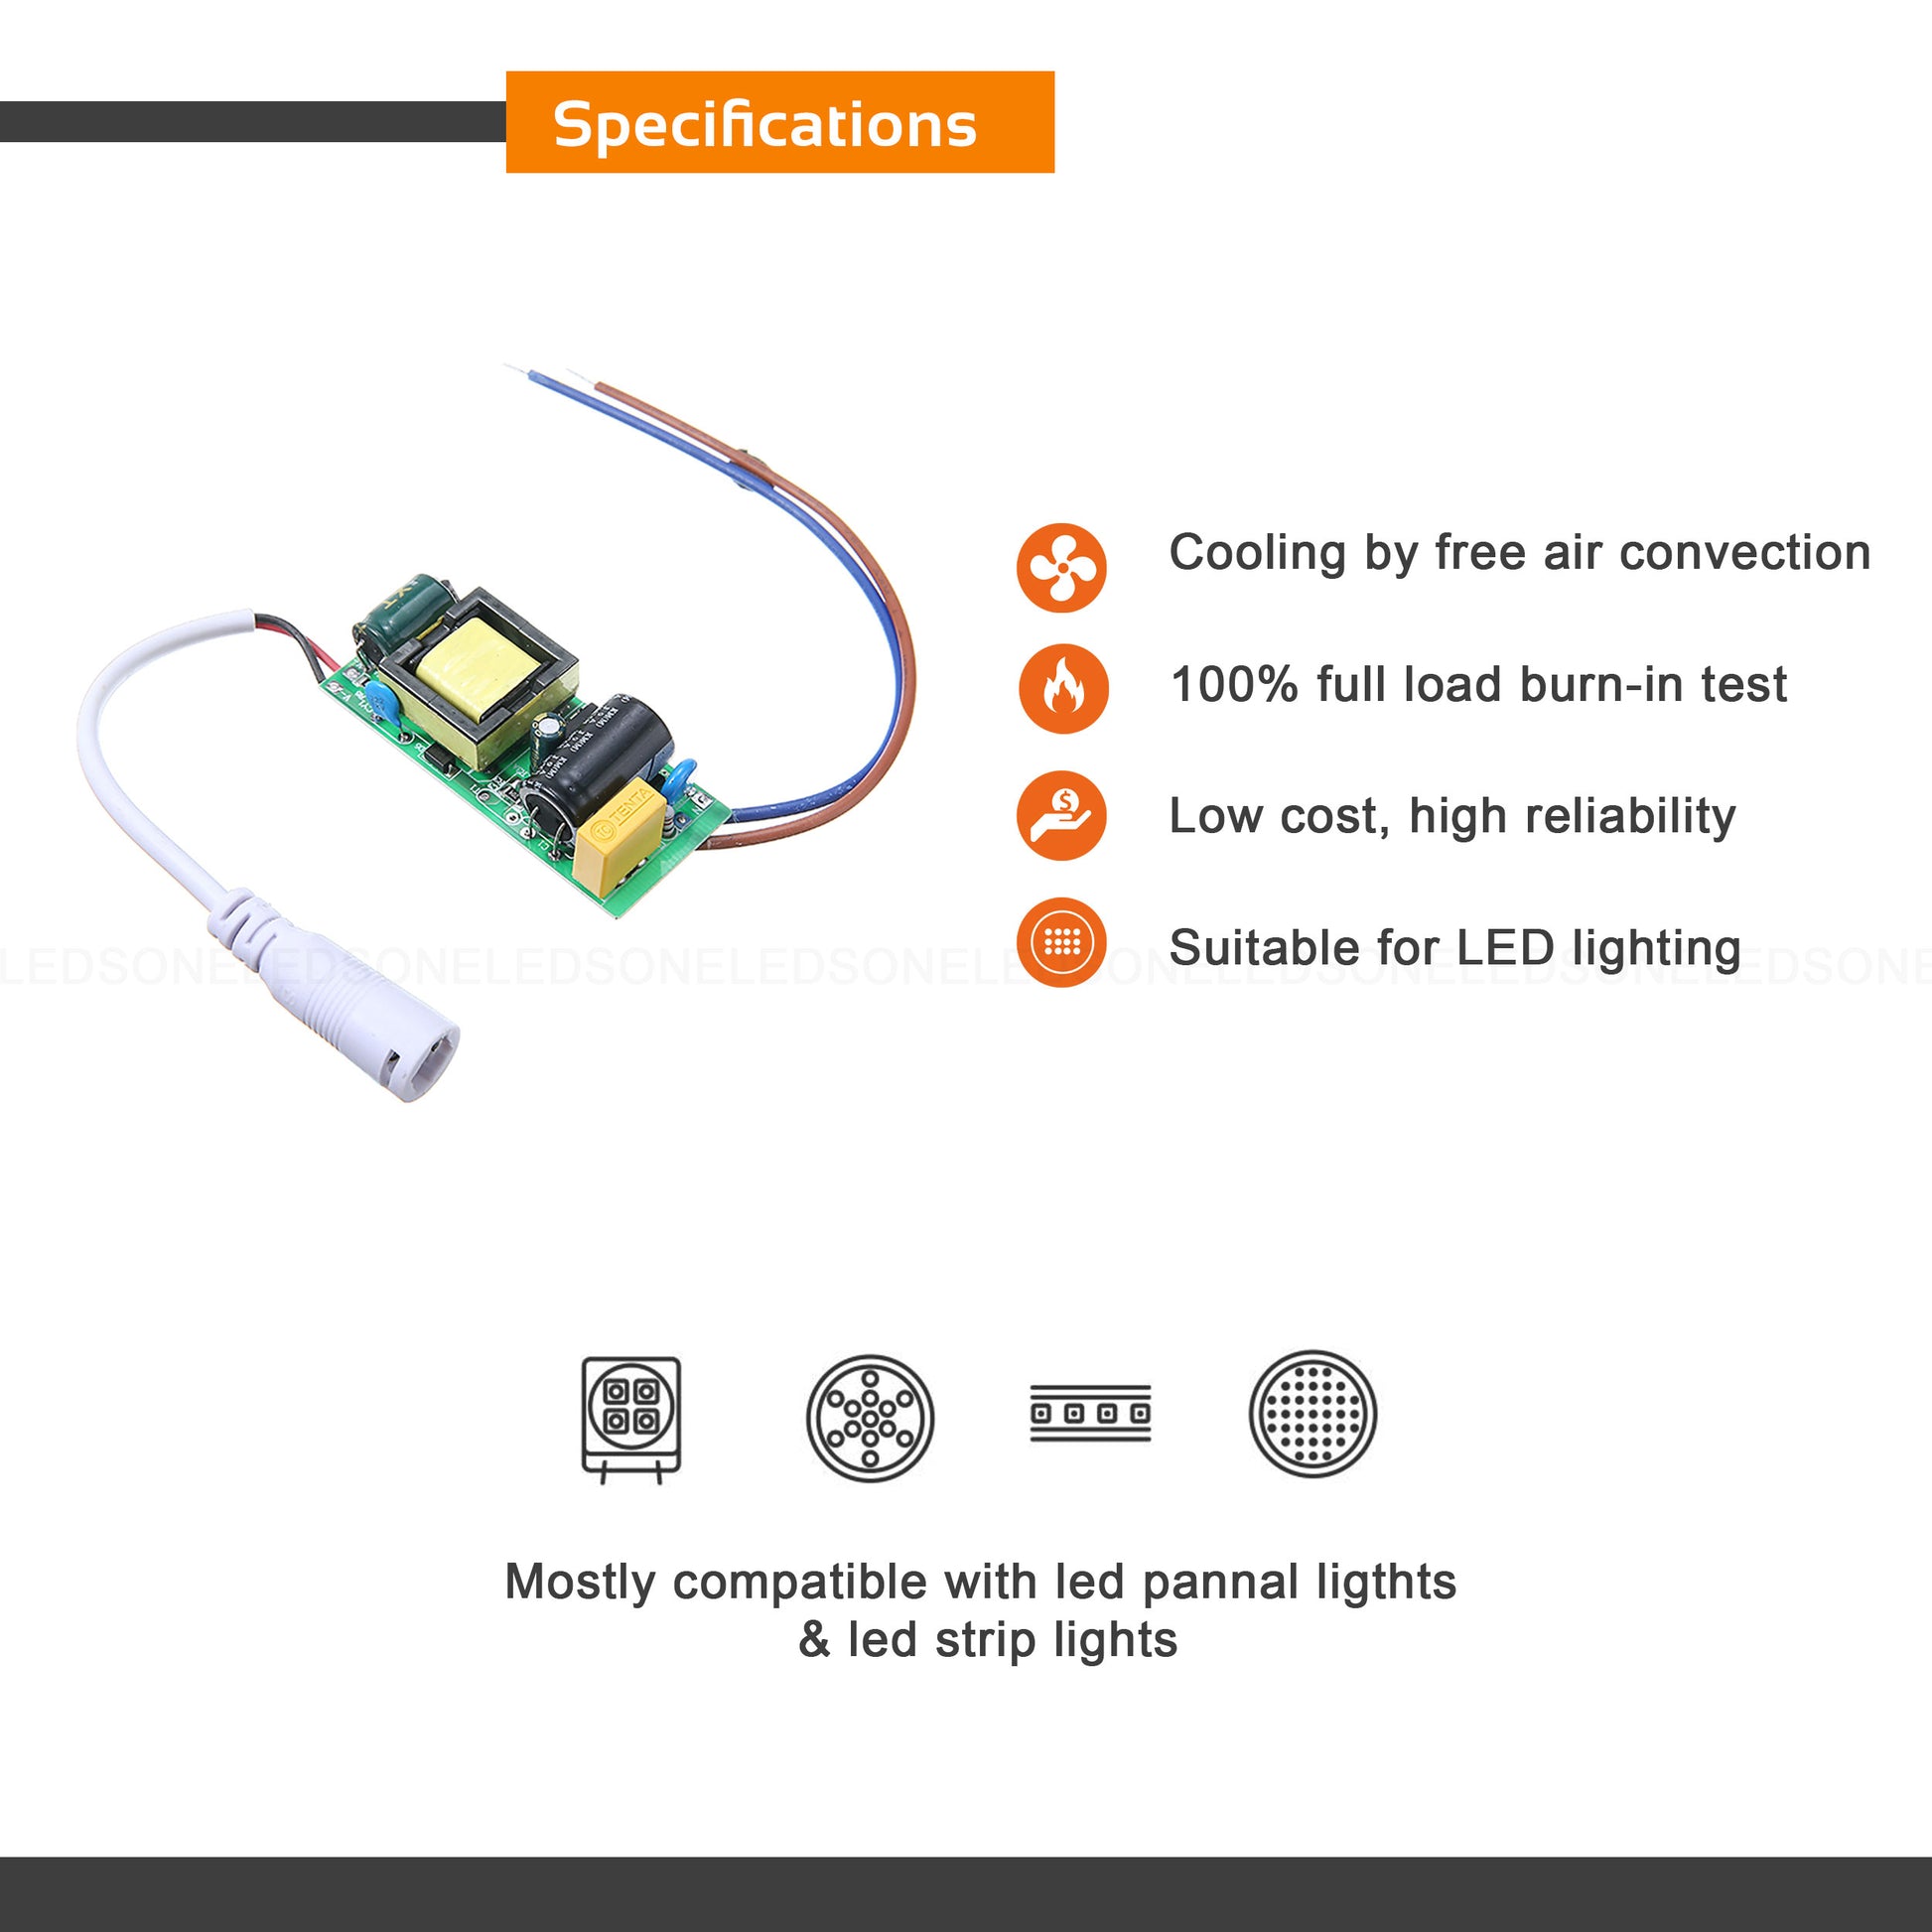 Specifications of 24w 600mAmp LED Driver